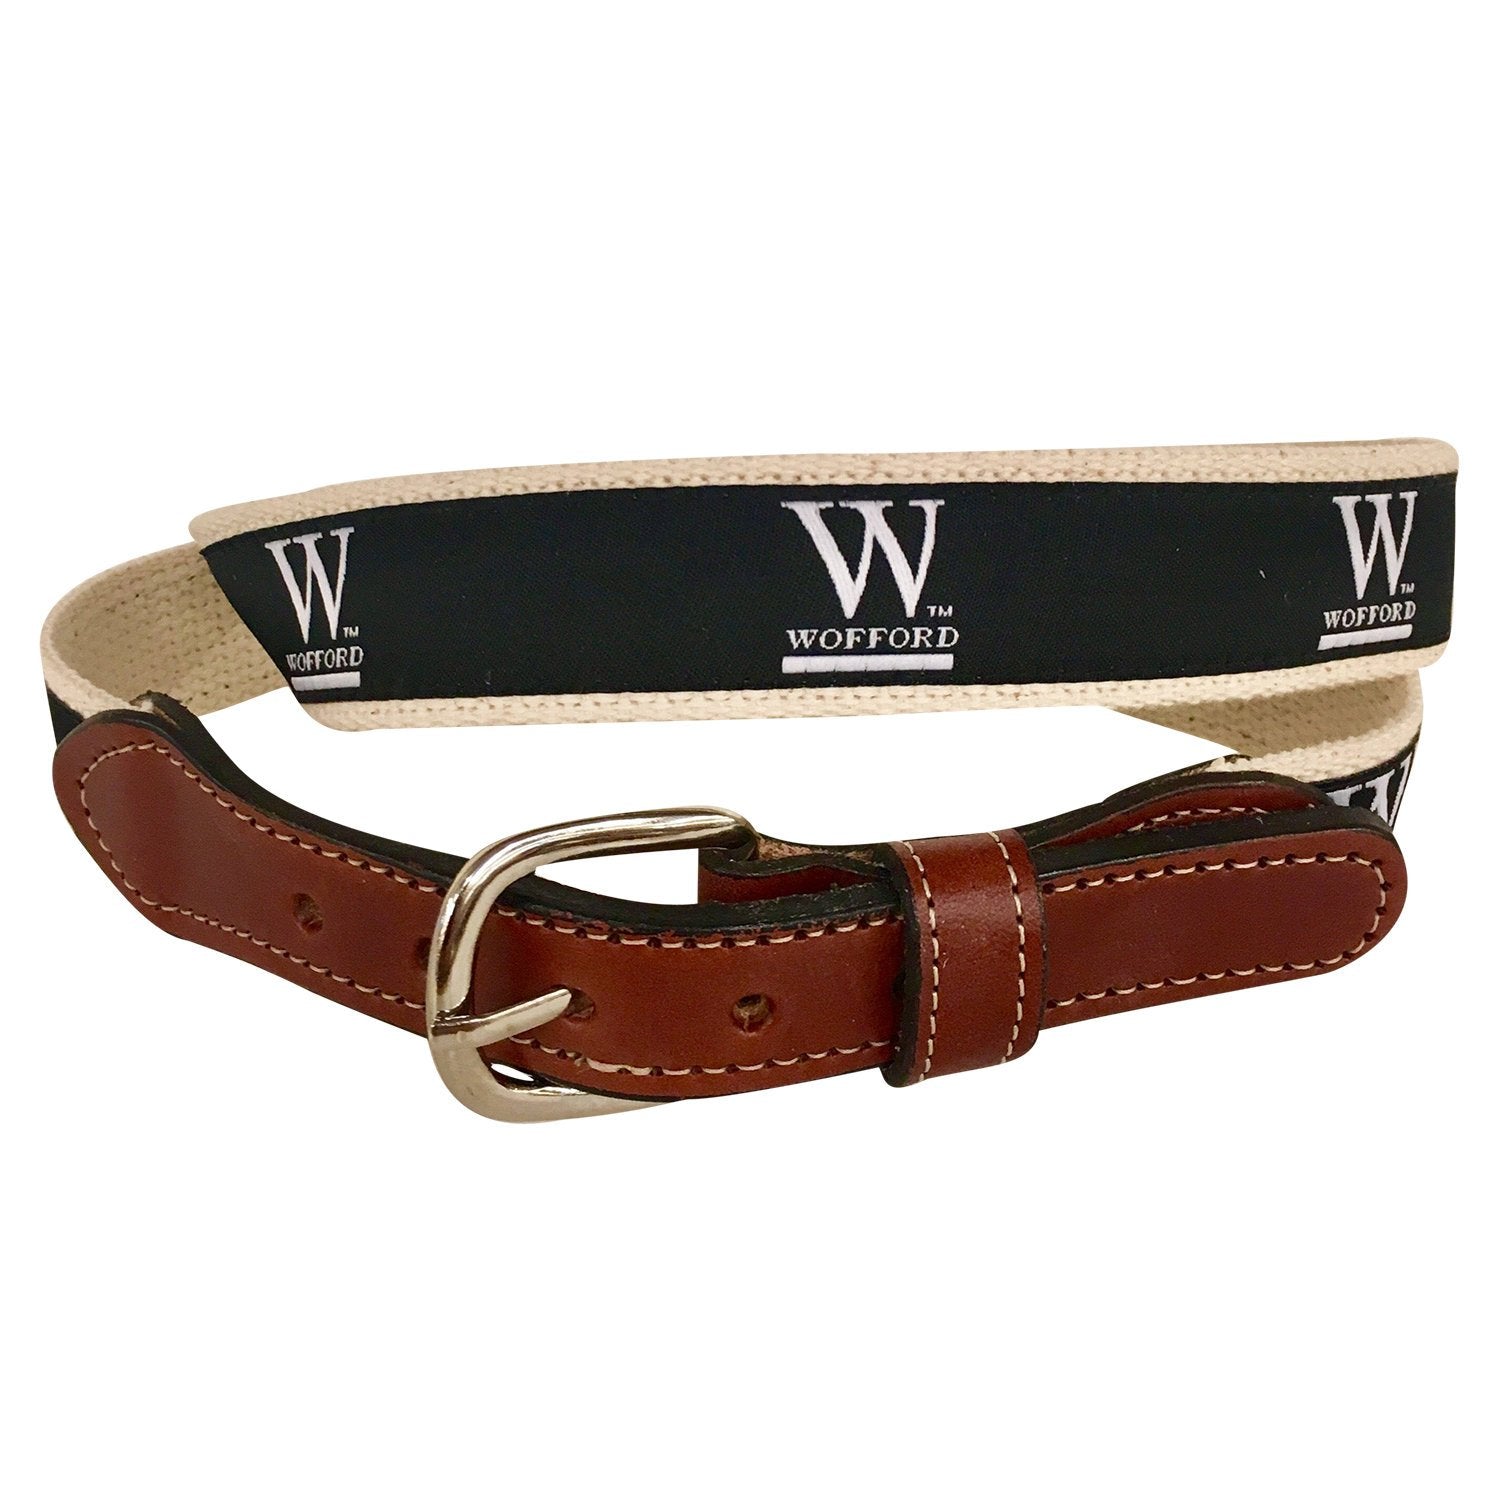 Wofford cotton Web Leather Belt